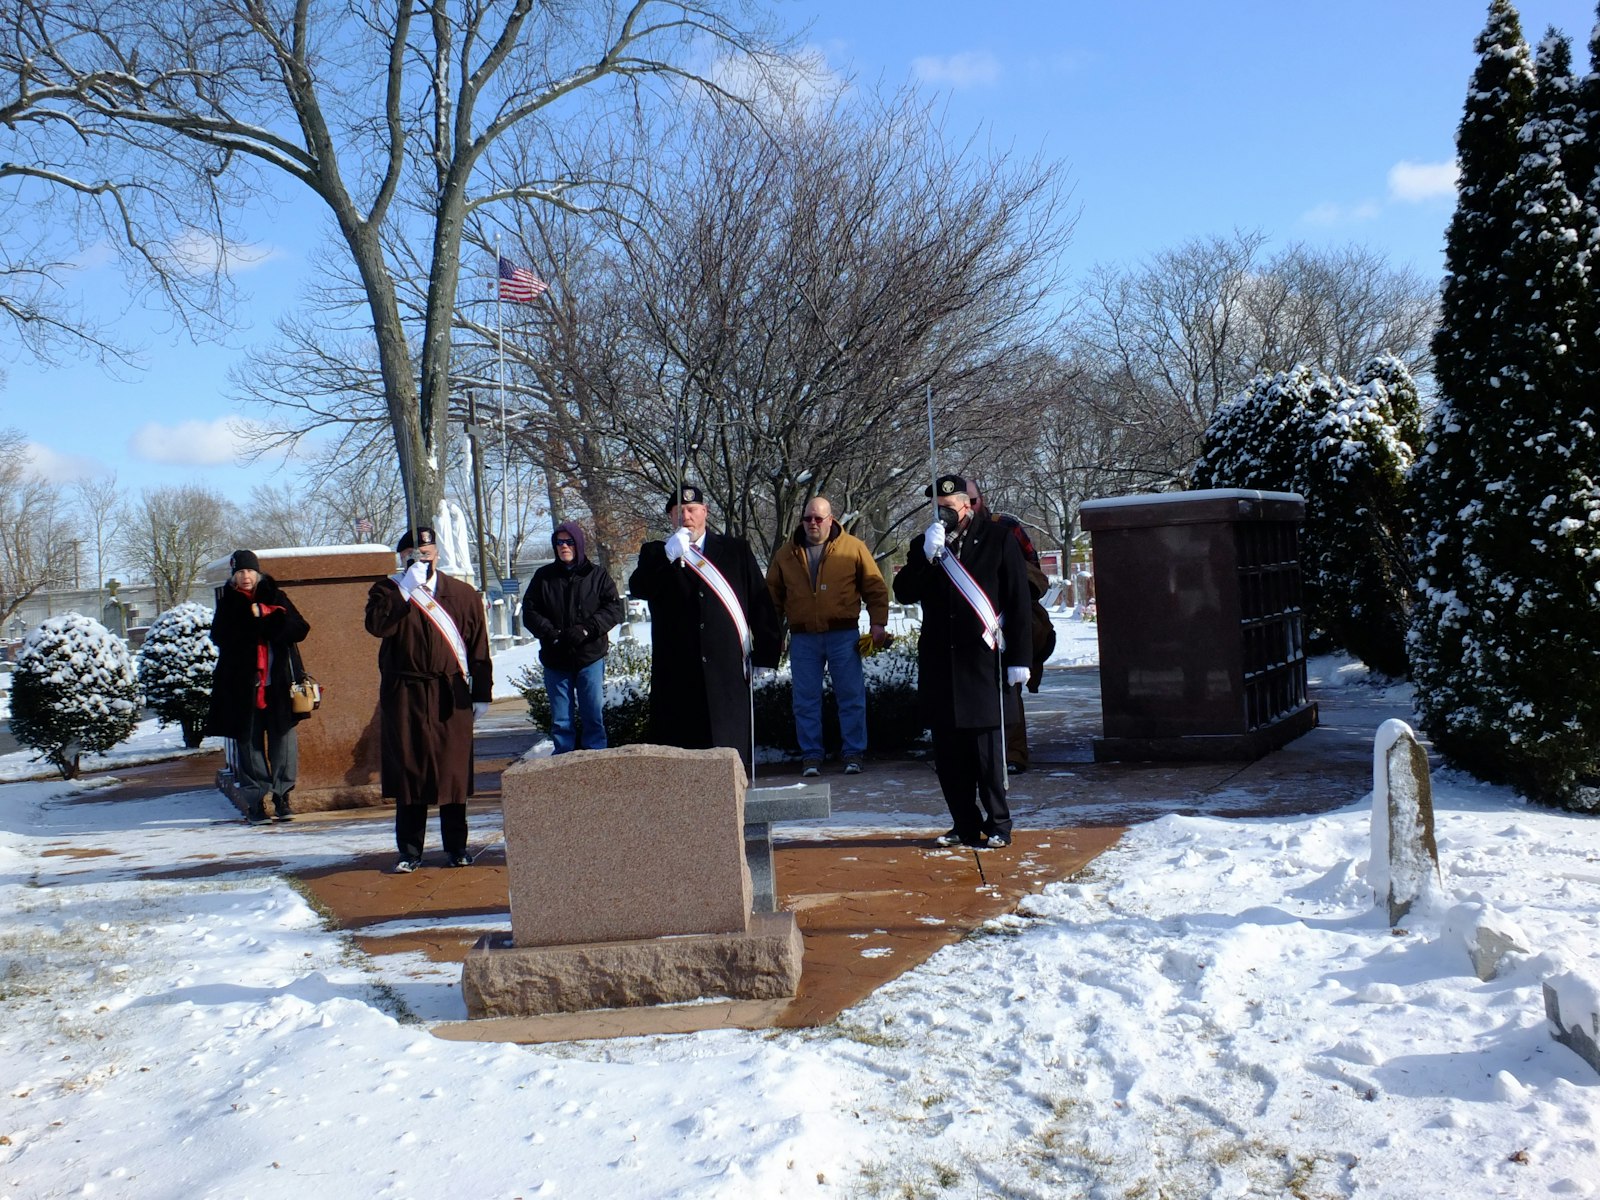 Marchers pray at the memorial monument for the unborn at Mt. Carmel Cemetery in Wyandotte.